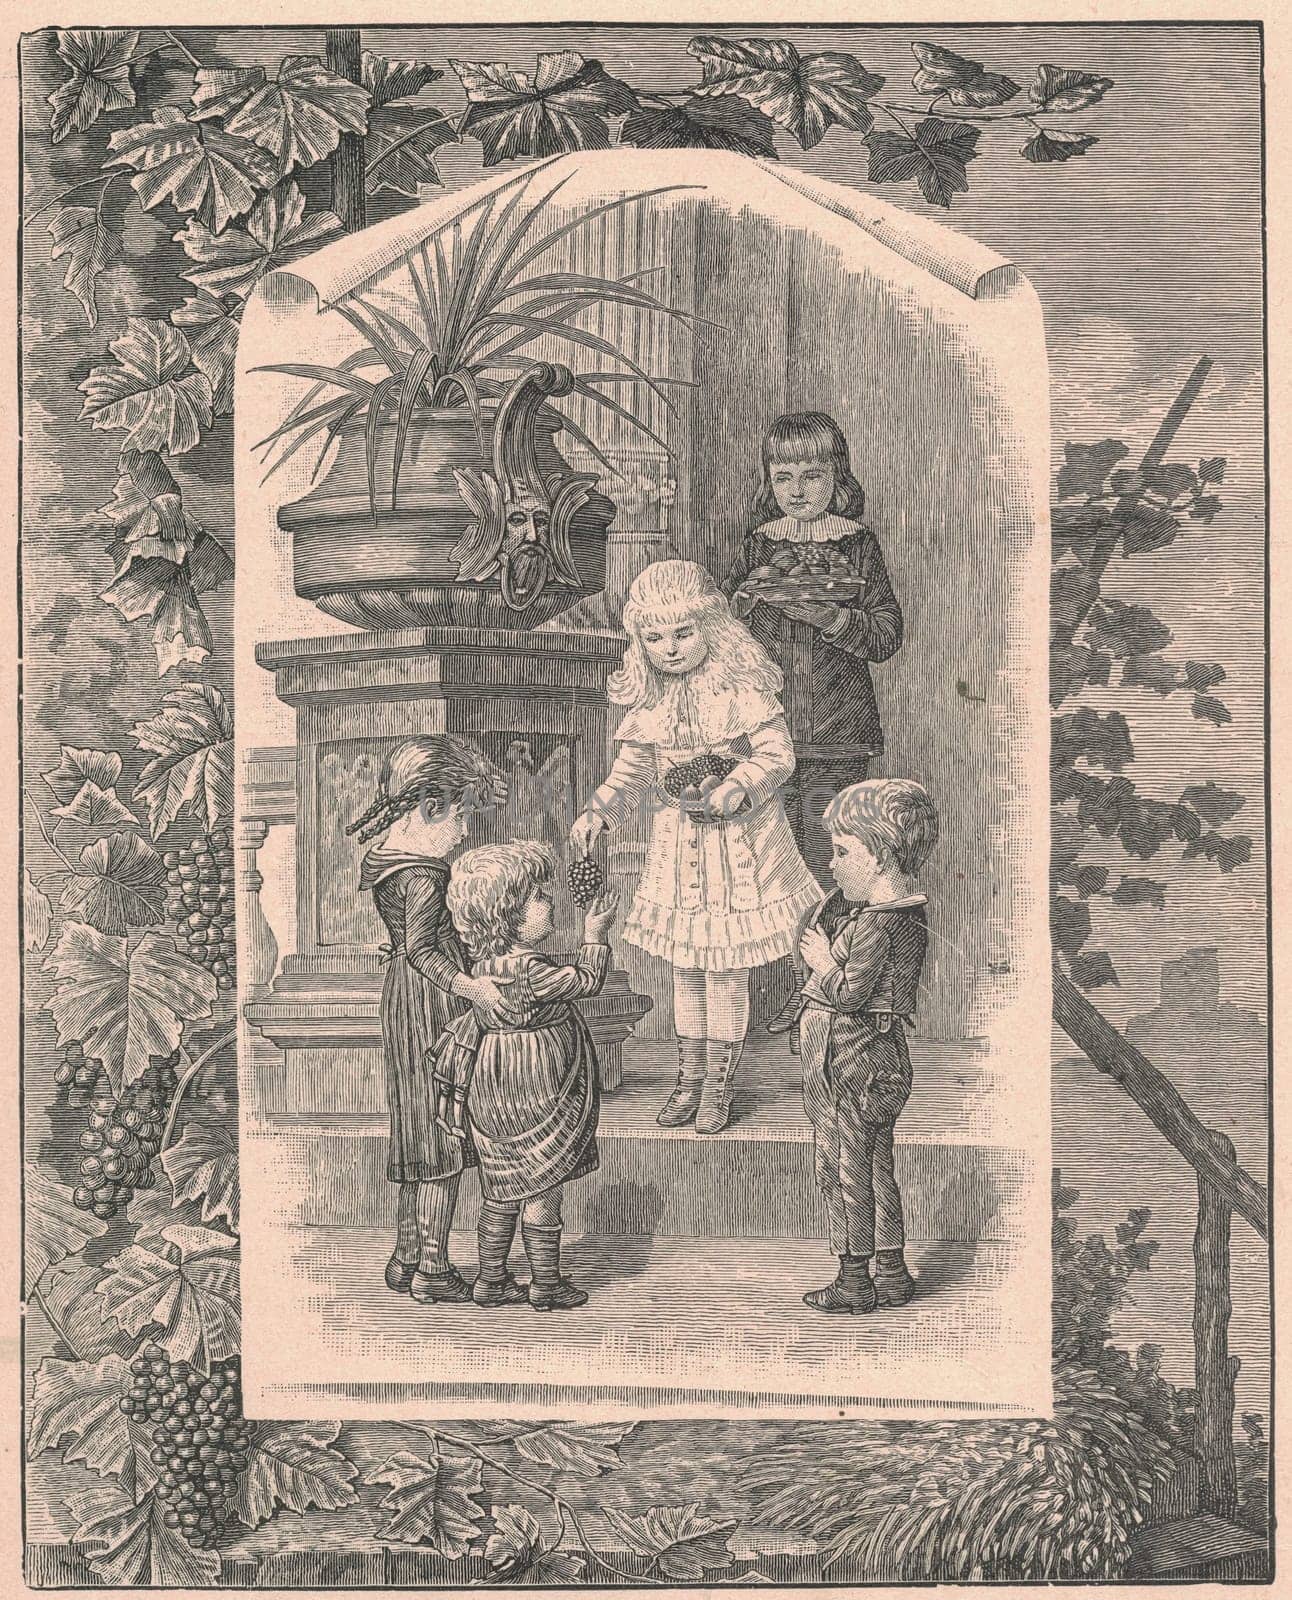 Black and white antique illustration shows a beautiful girl gives the grapes a little girl. Vintage drawing shows the group of children hold the grapes. Old picture from fairy tale book. Storybook illustration published 1910. by roman_nerud